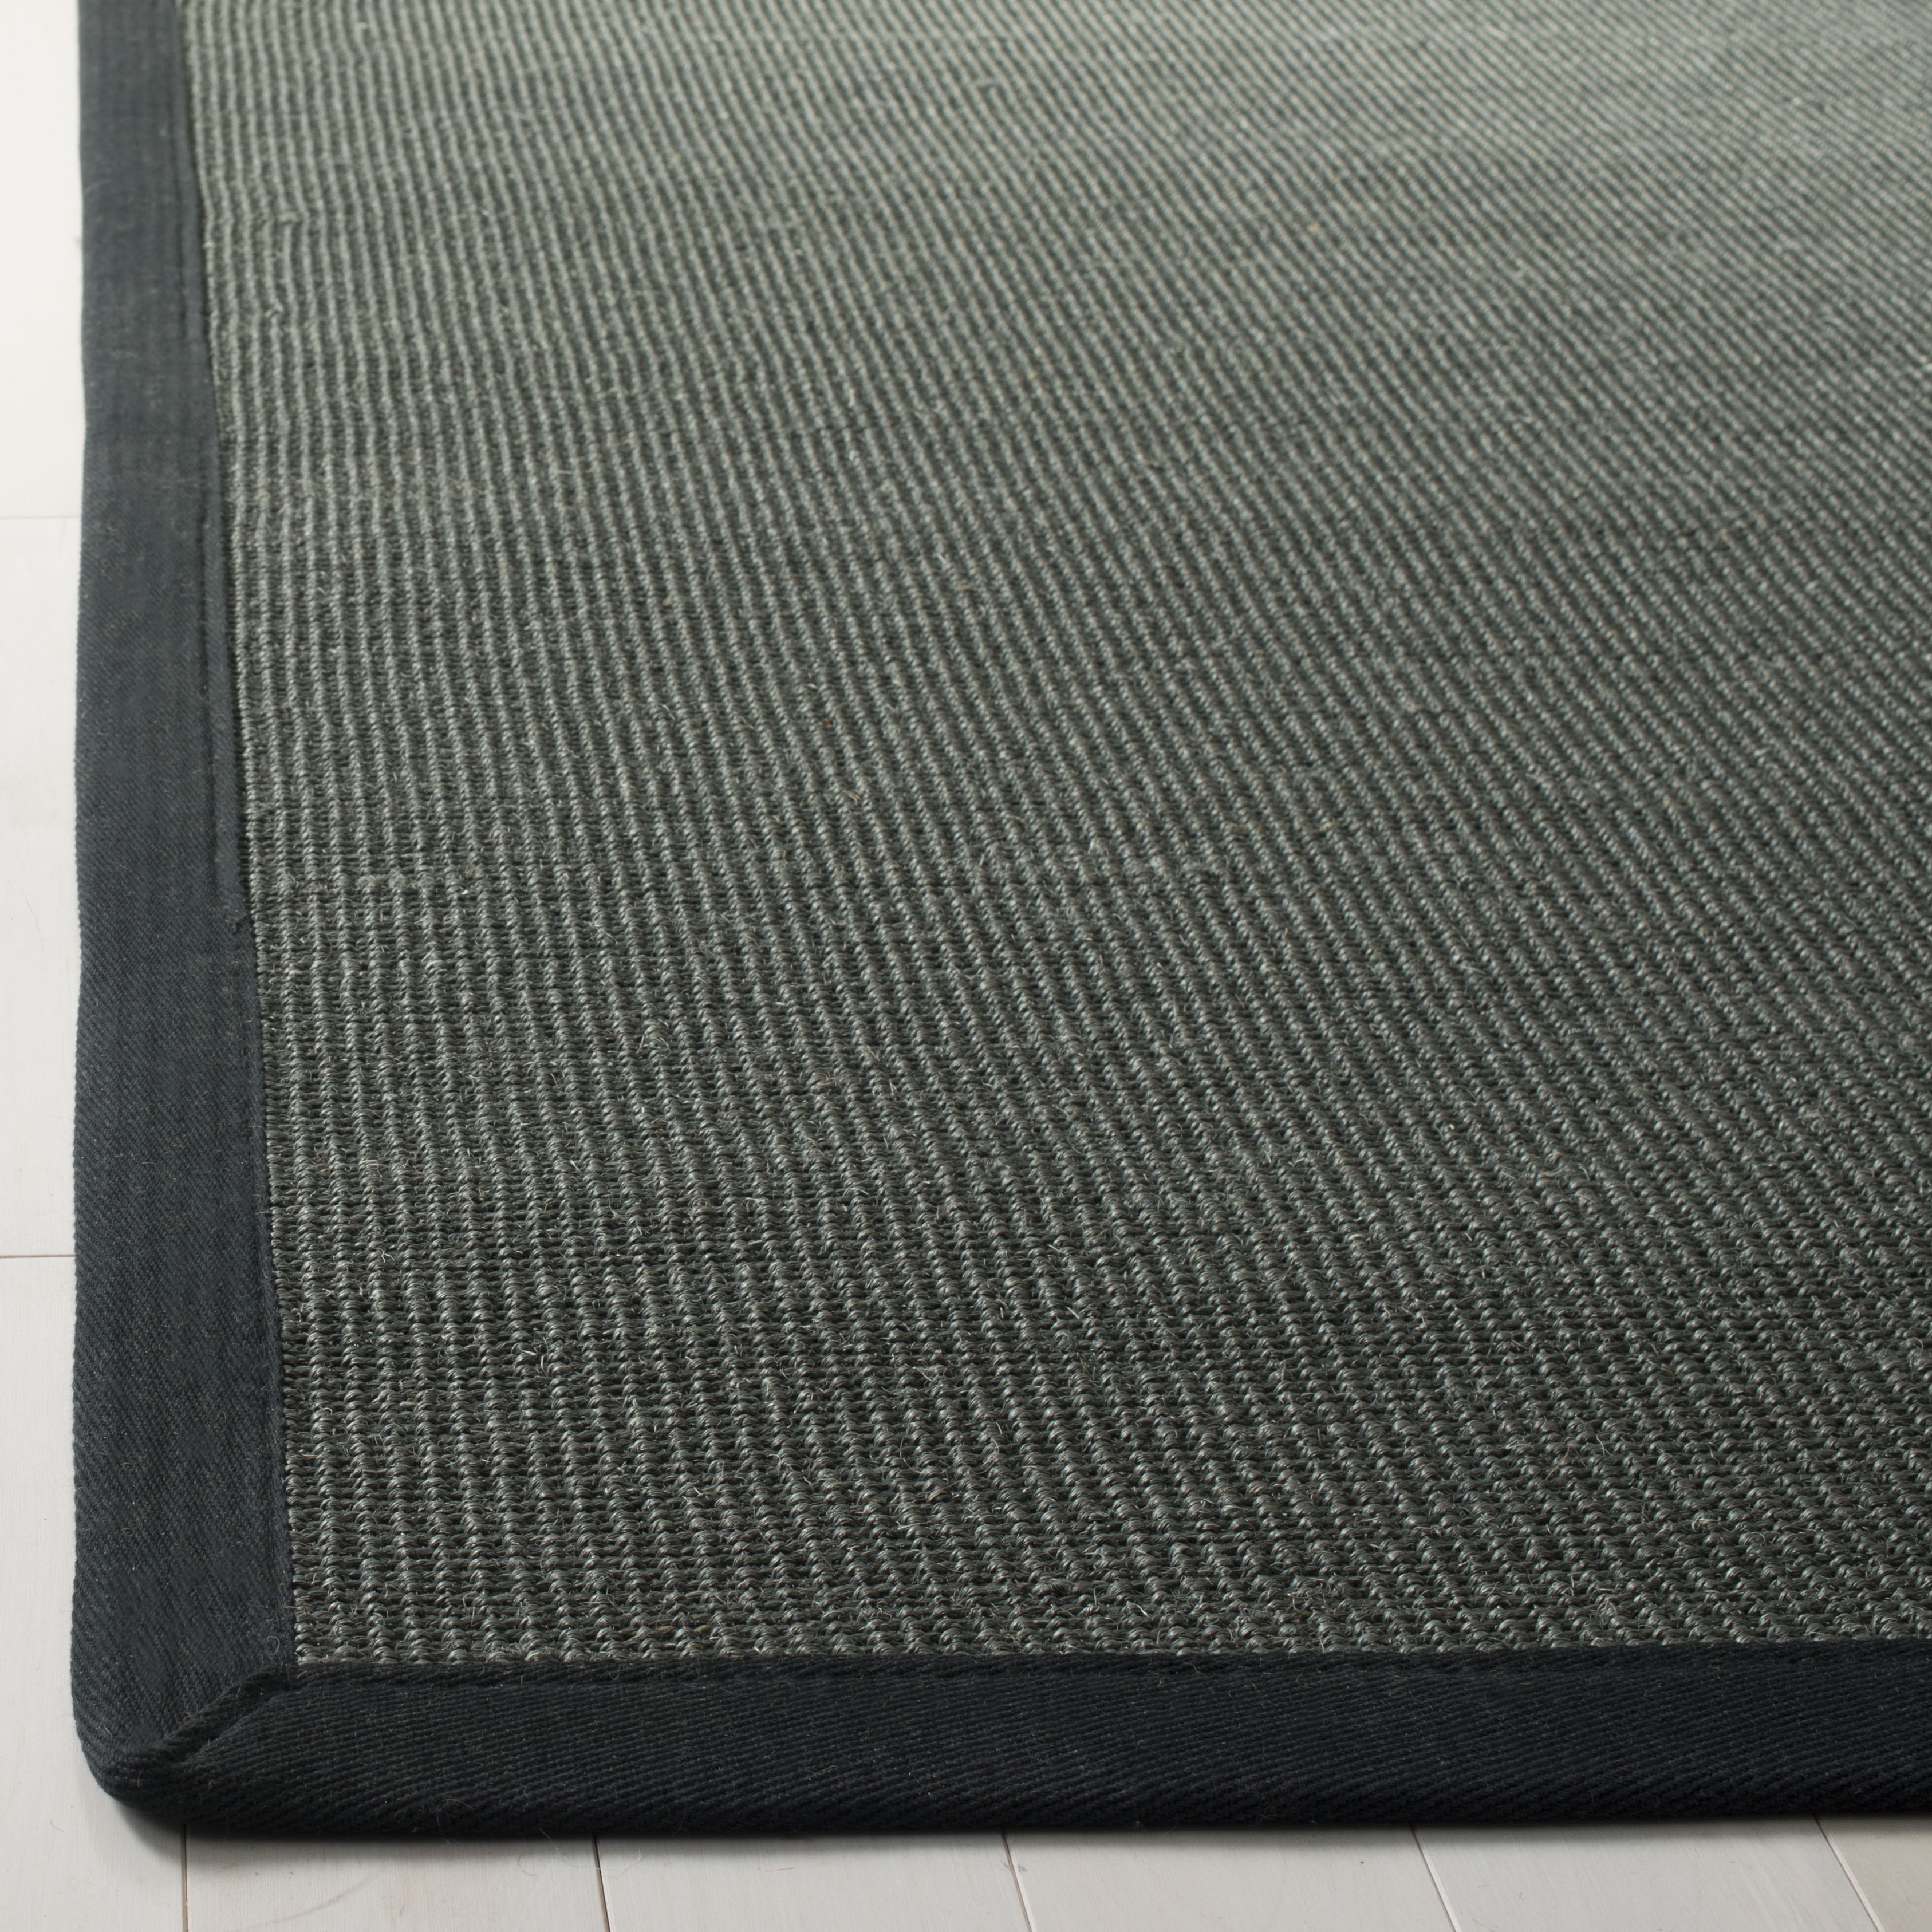 Arlo Home Woven Area Rug, NF131D, Anthracite/Black,  9' X 12' - Image 1